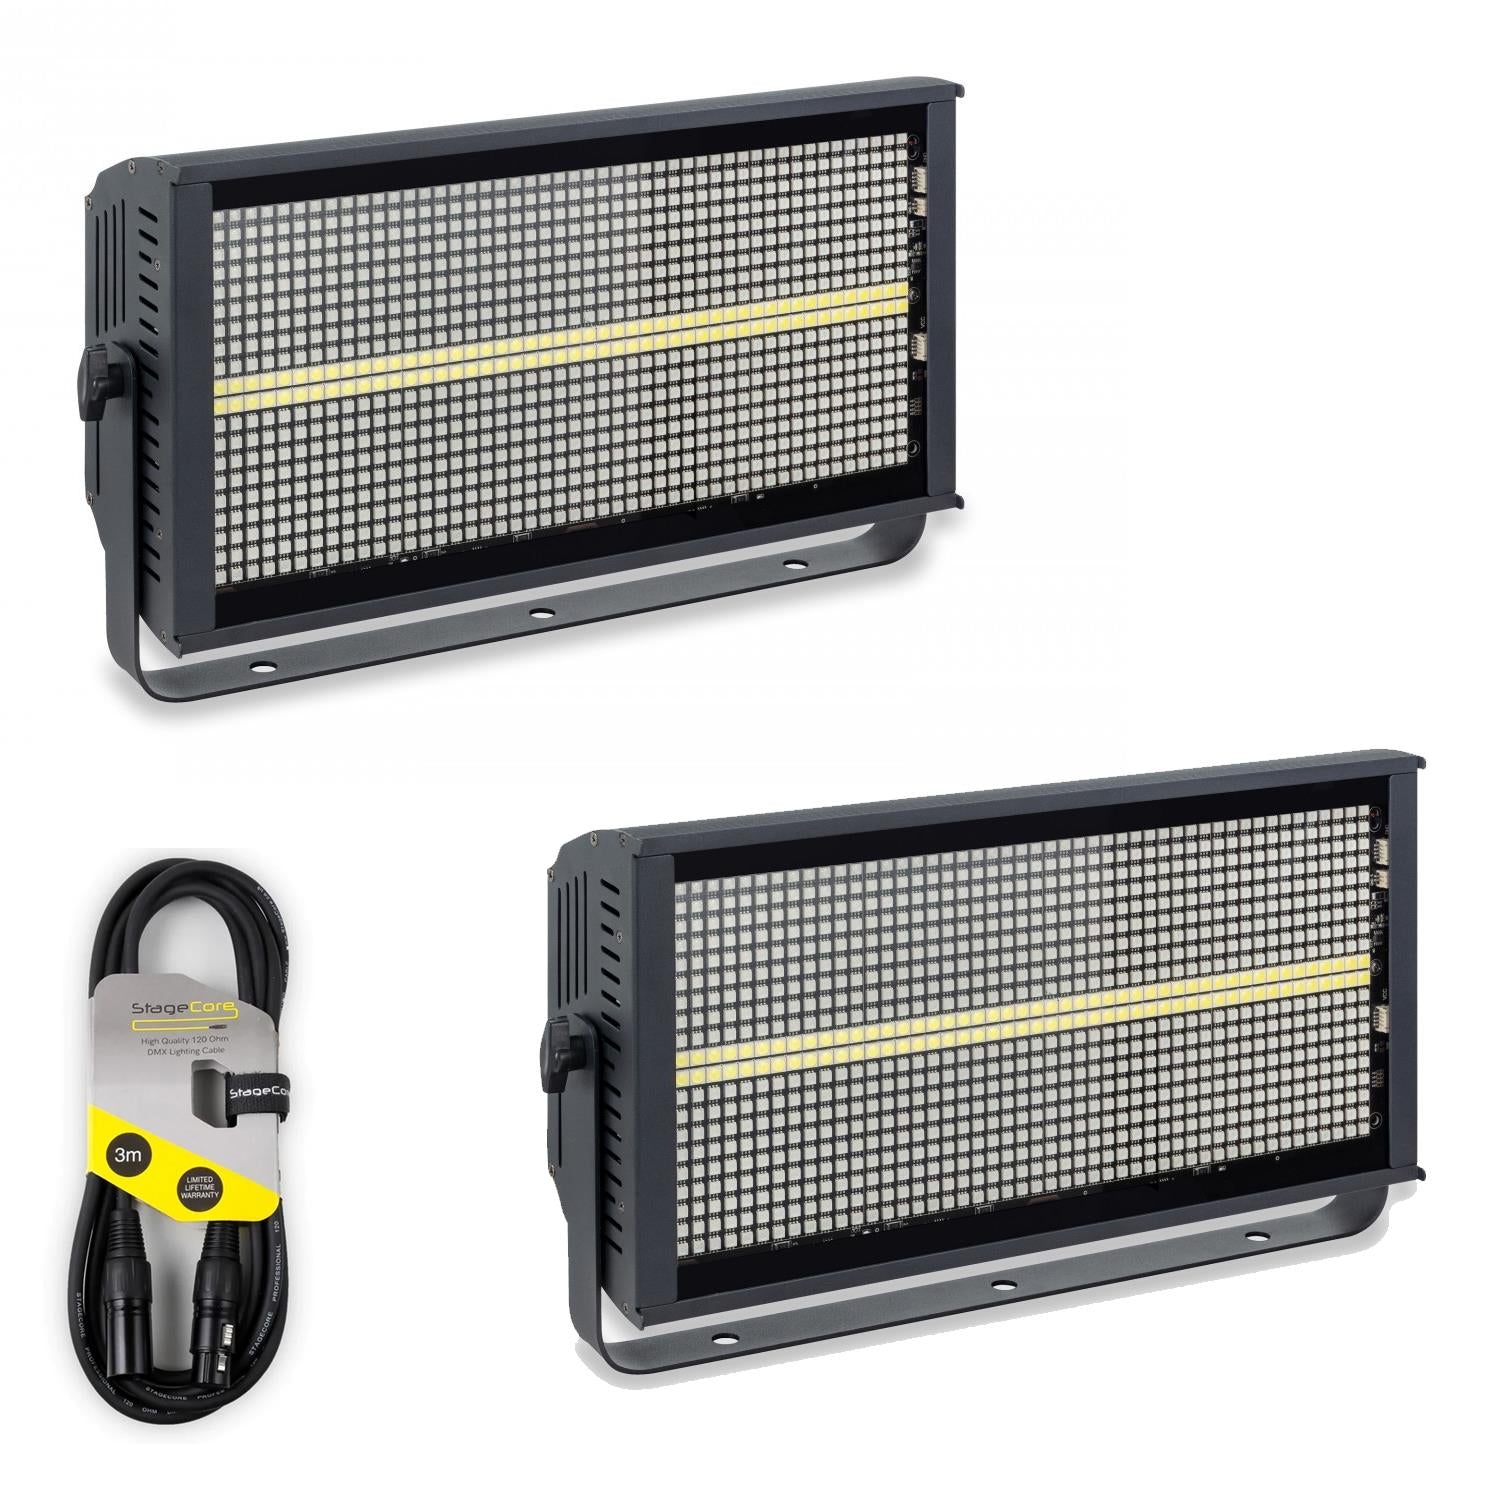 2 x Centolight Lightblaster S960 Wash and Strobe LED Panel With DMX Cable